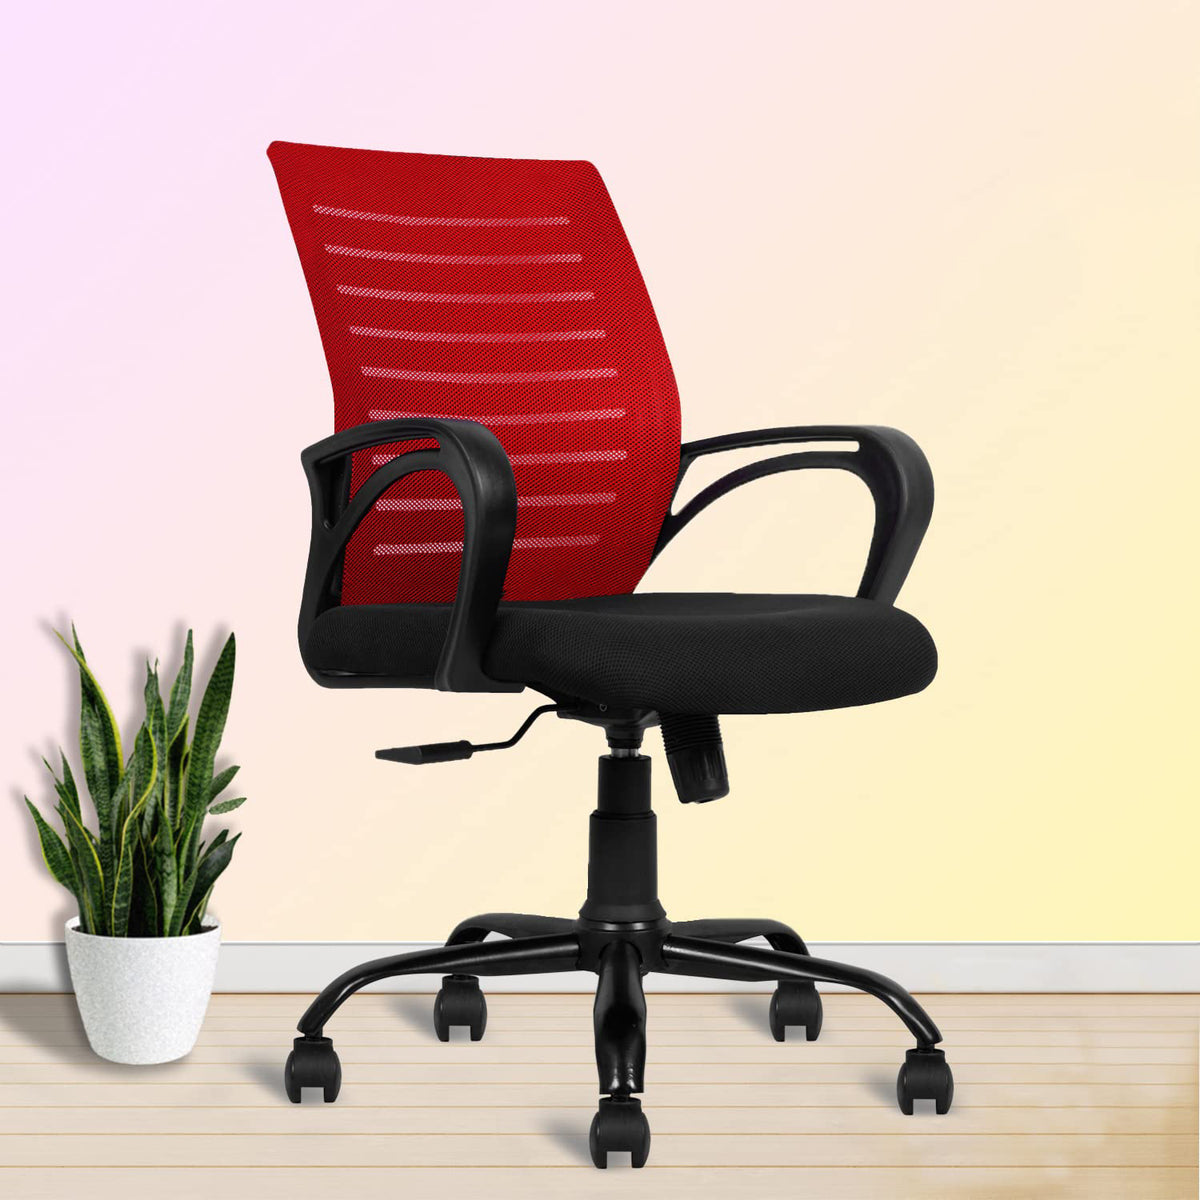 SmileSellers Boom Mesh Mid-Back Ergonomic Desk Office Chair with Tilting Mechanism, Comfortable Seat, and Revolving Heavy Duty Metal Base | Ideal for Work from Home & Study